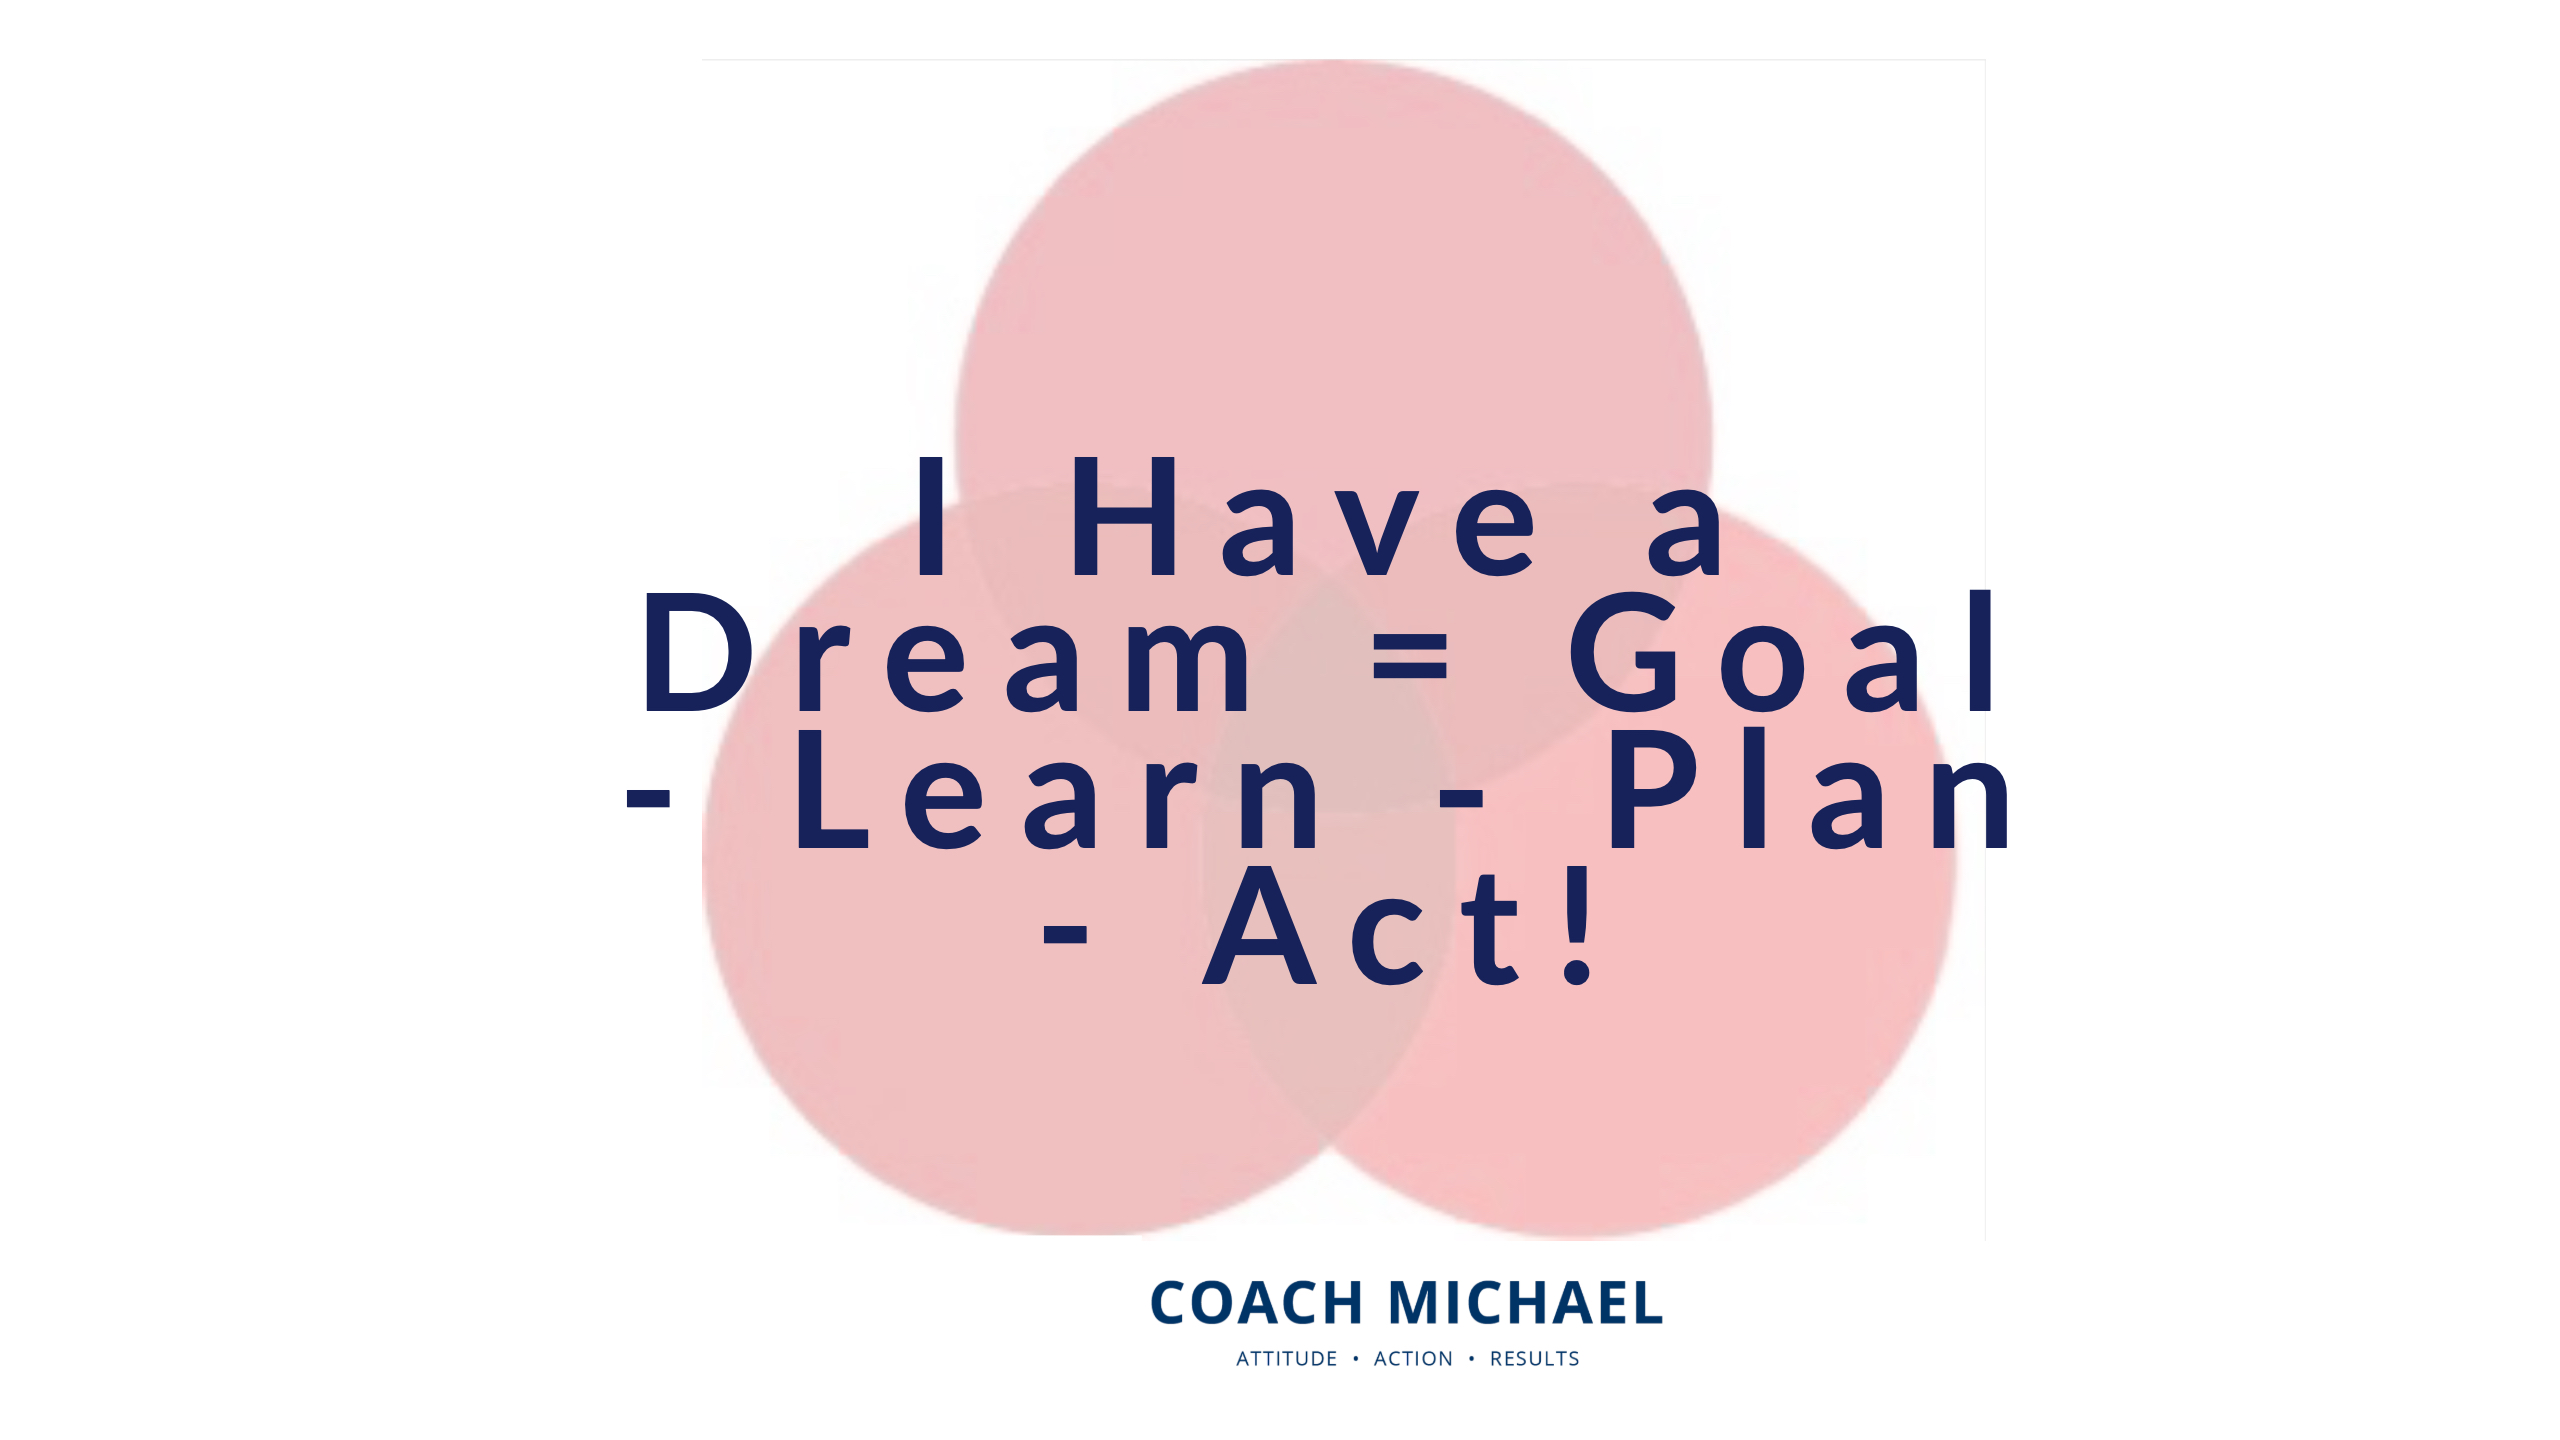 Dream Vision and Goals